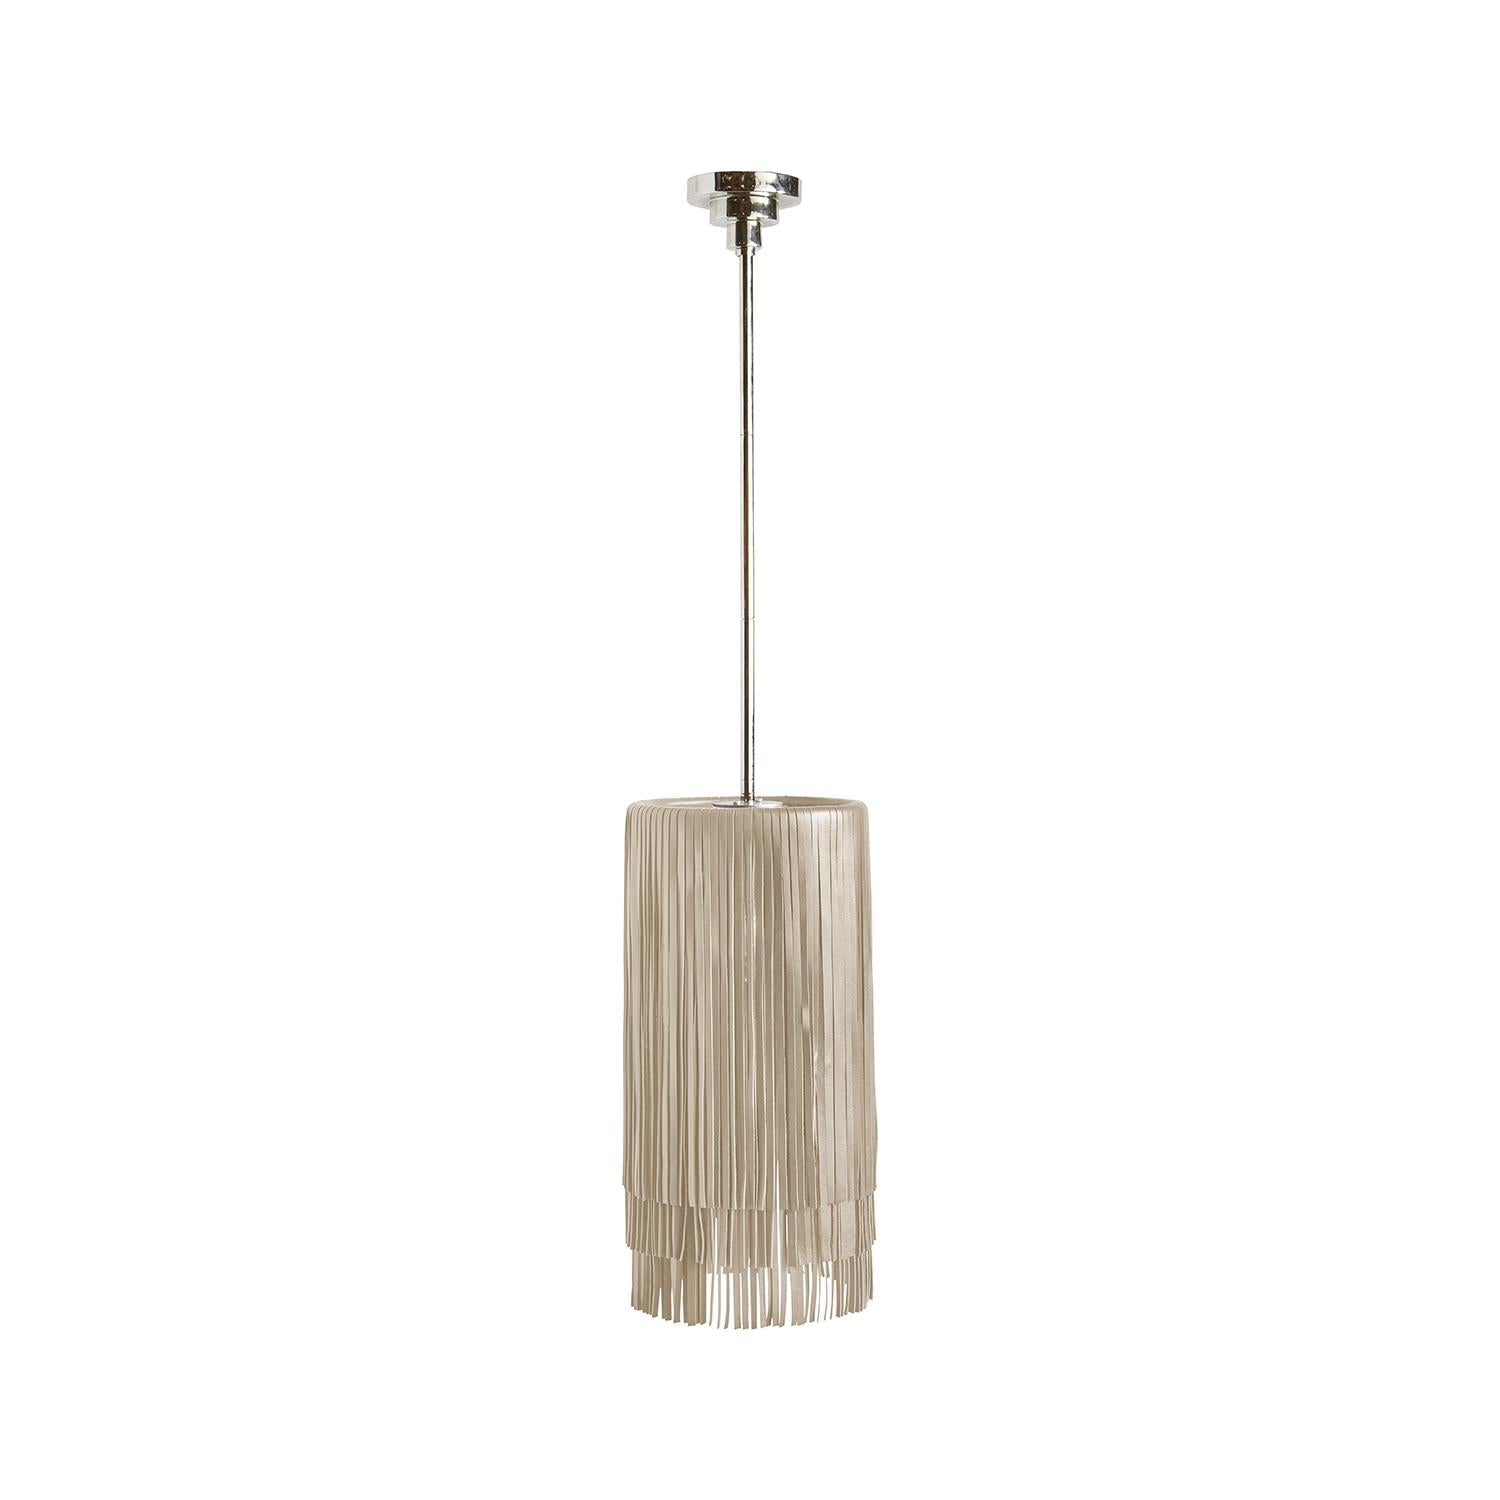 Nairobi Leather Pendant in Nickel Finish and Cream-Stone Leather